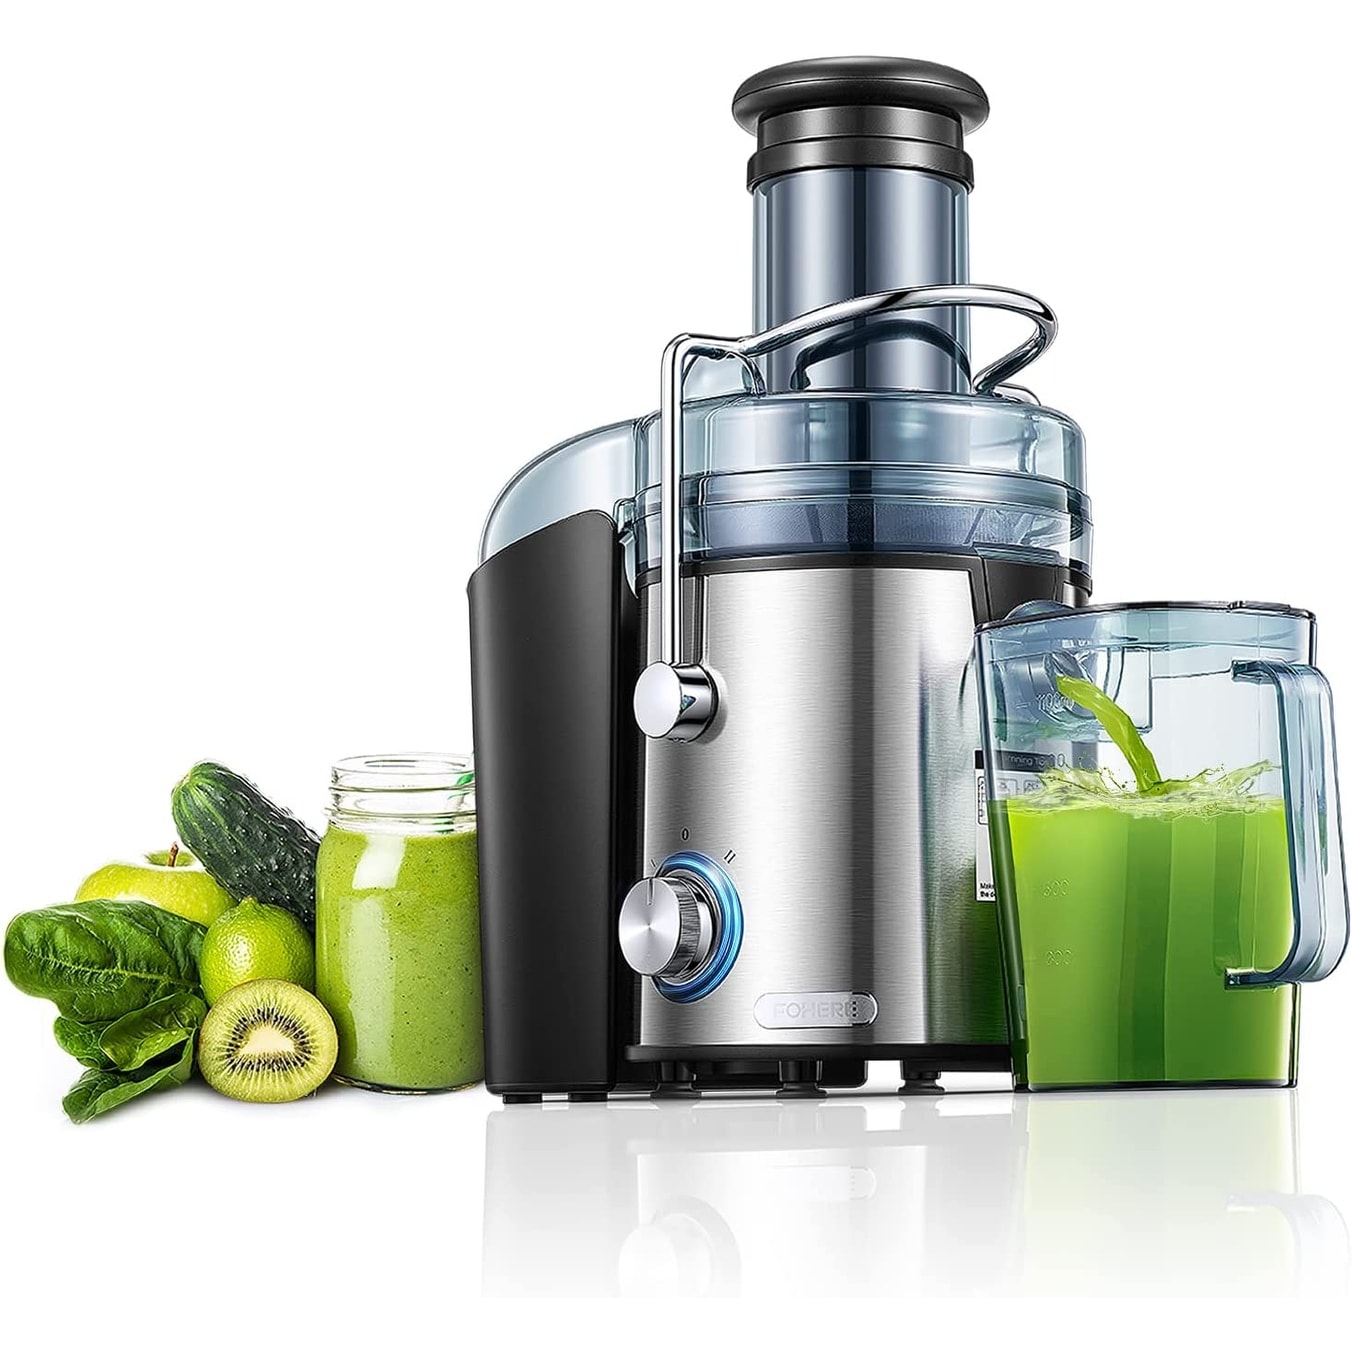 Are Juicers and Juice Extractors the Same Appliance? - Continental